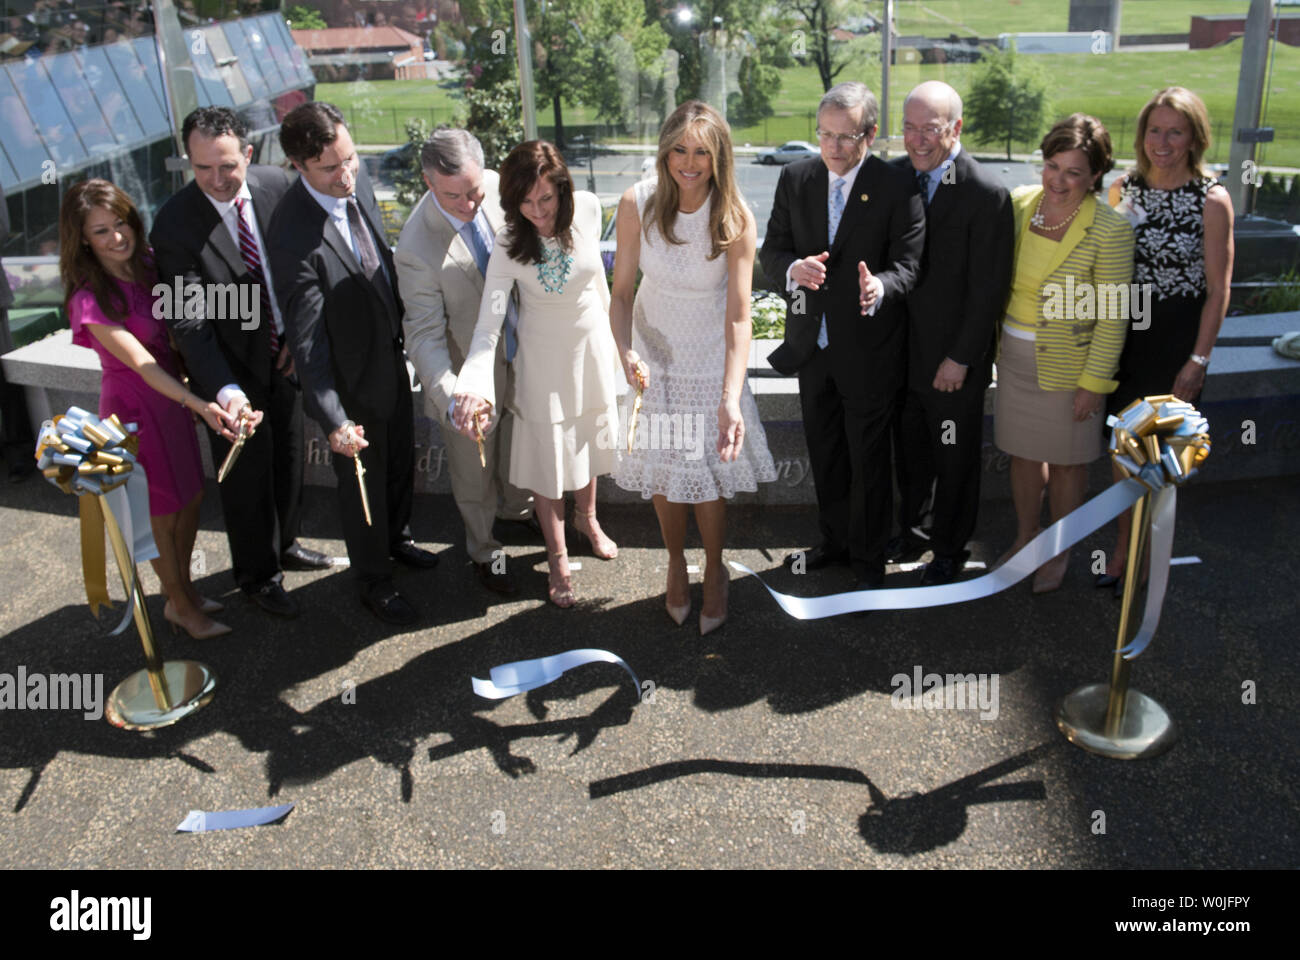 First Lady Melania Trump cuts the ribbon with others as she helps to open the Bunny Mellon Healing Garden, dedicated to the First Ladies of the United States, at Children's National Hospital in Washington, D.C. on April 28, 2017.  The hospital transformed a gravel rooftop into an outdoor garden for patients and their families. Photo by Kevin Dietsch/UPI Stock Photo